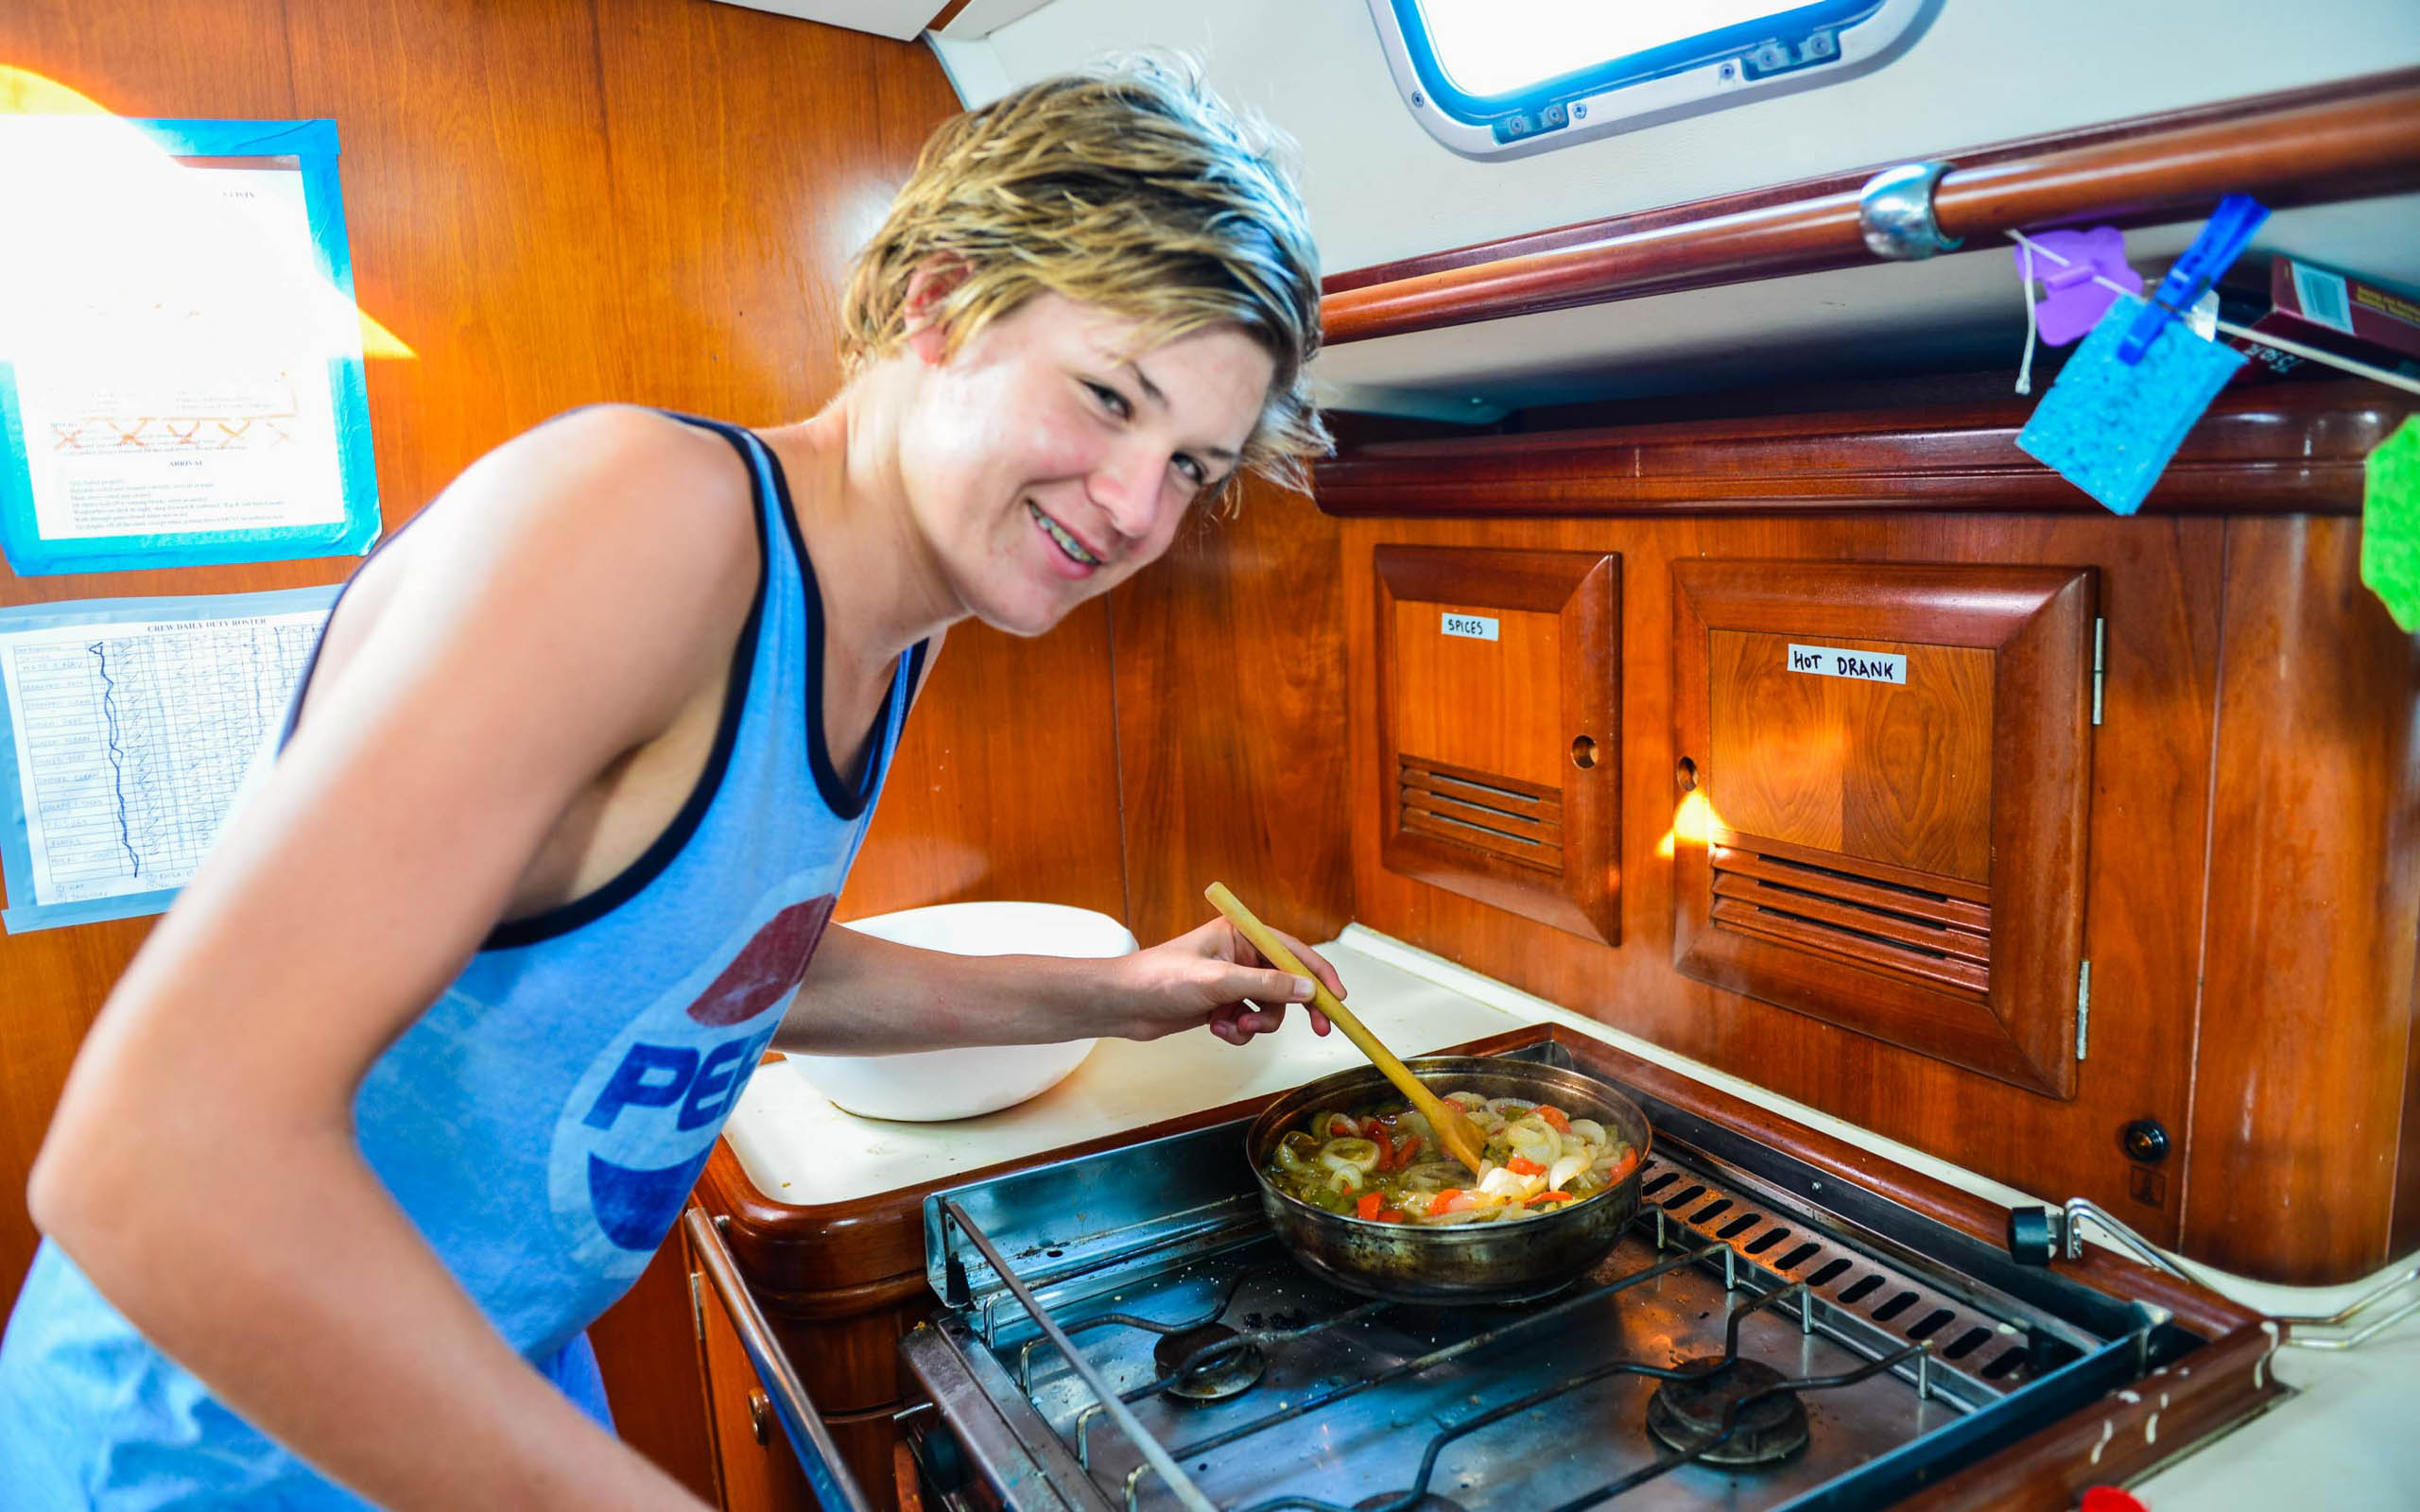 Camper cooking in a kitchen on a sailboat.